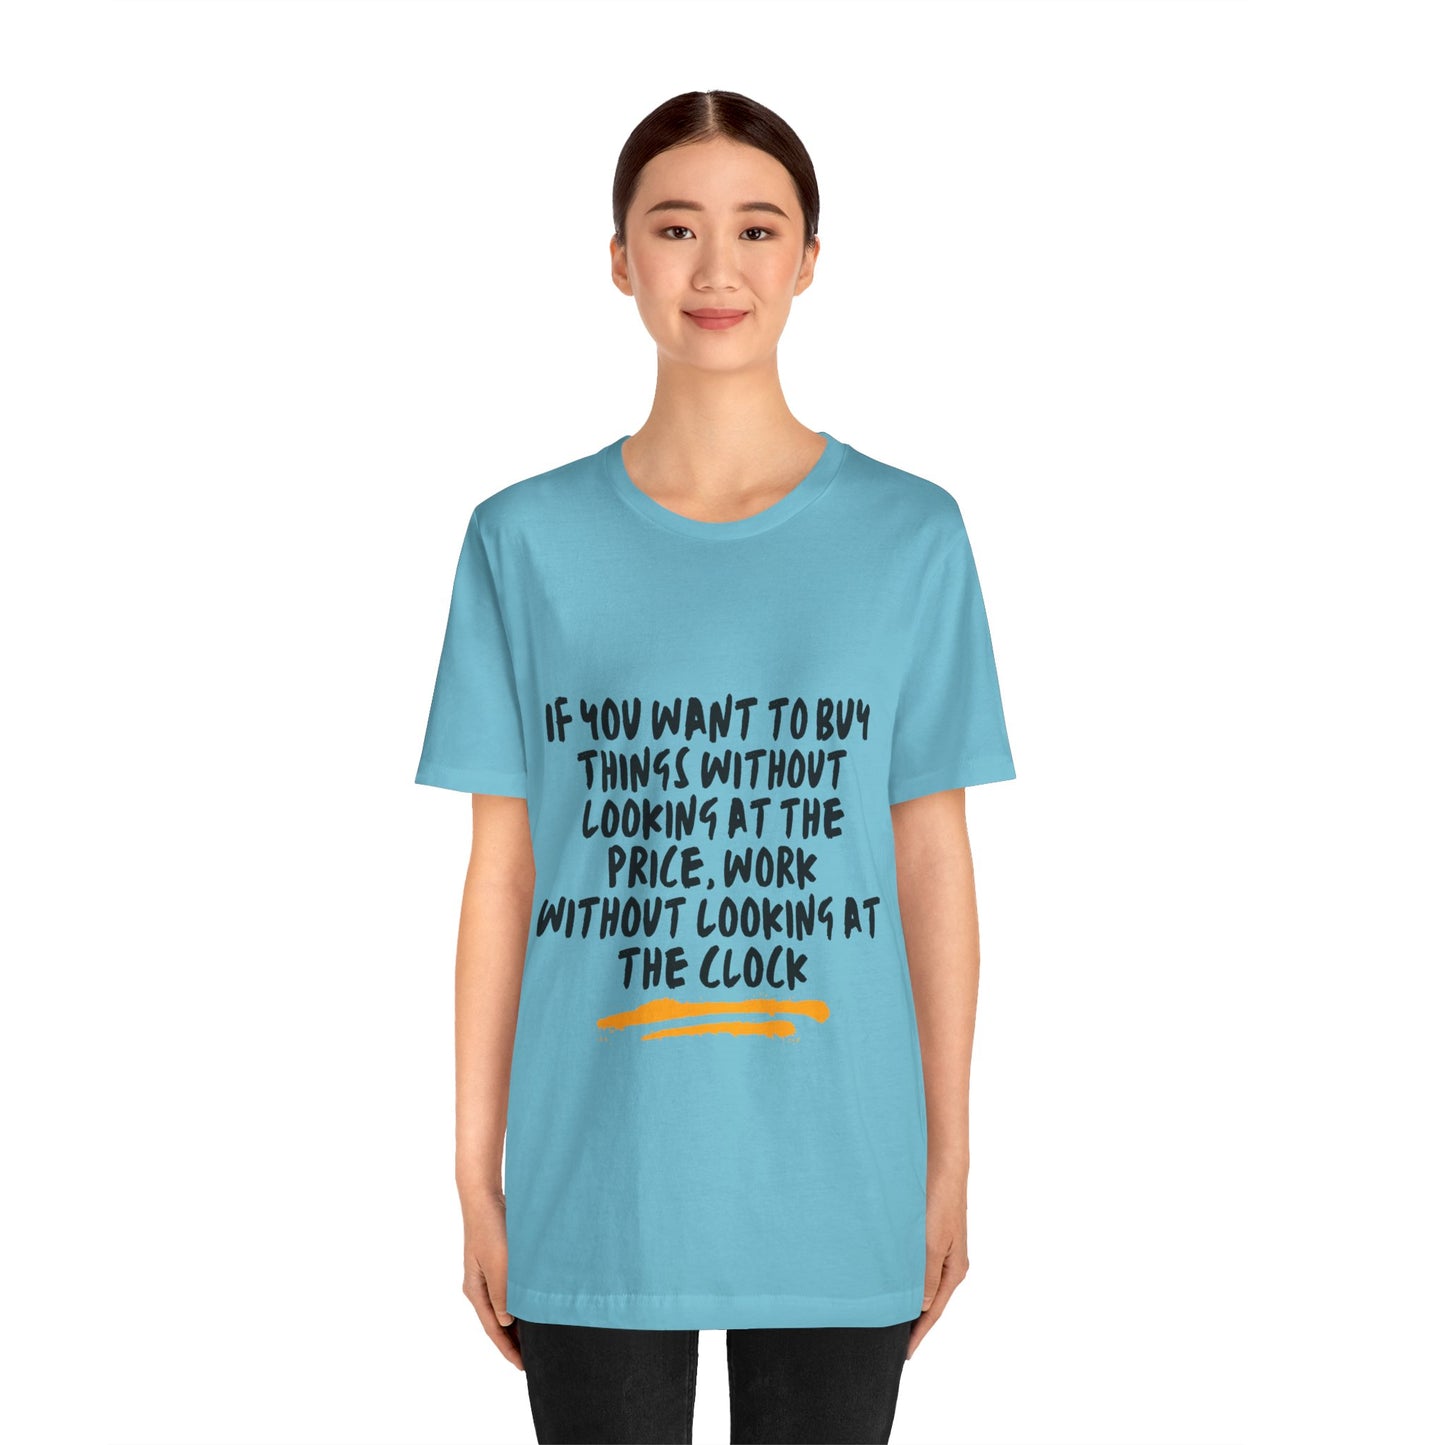 Work without looking at the clock T-shirt - Light Colors